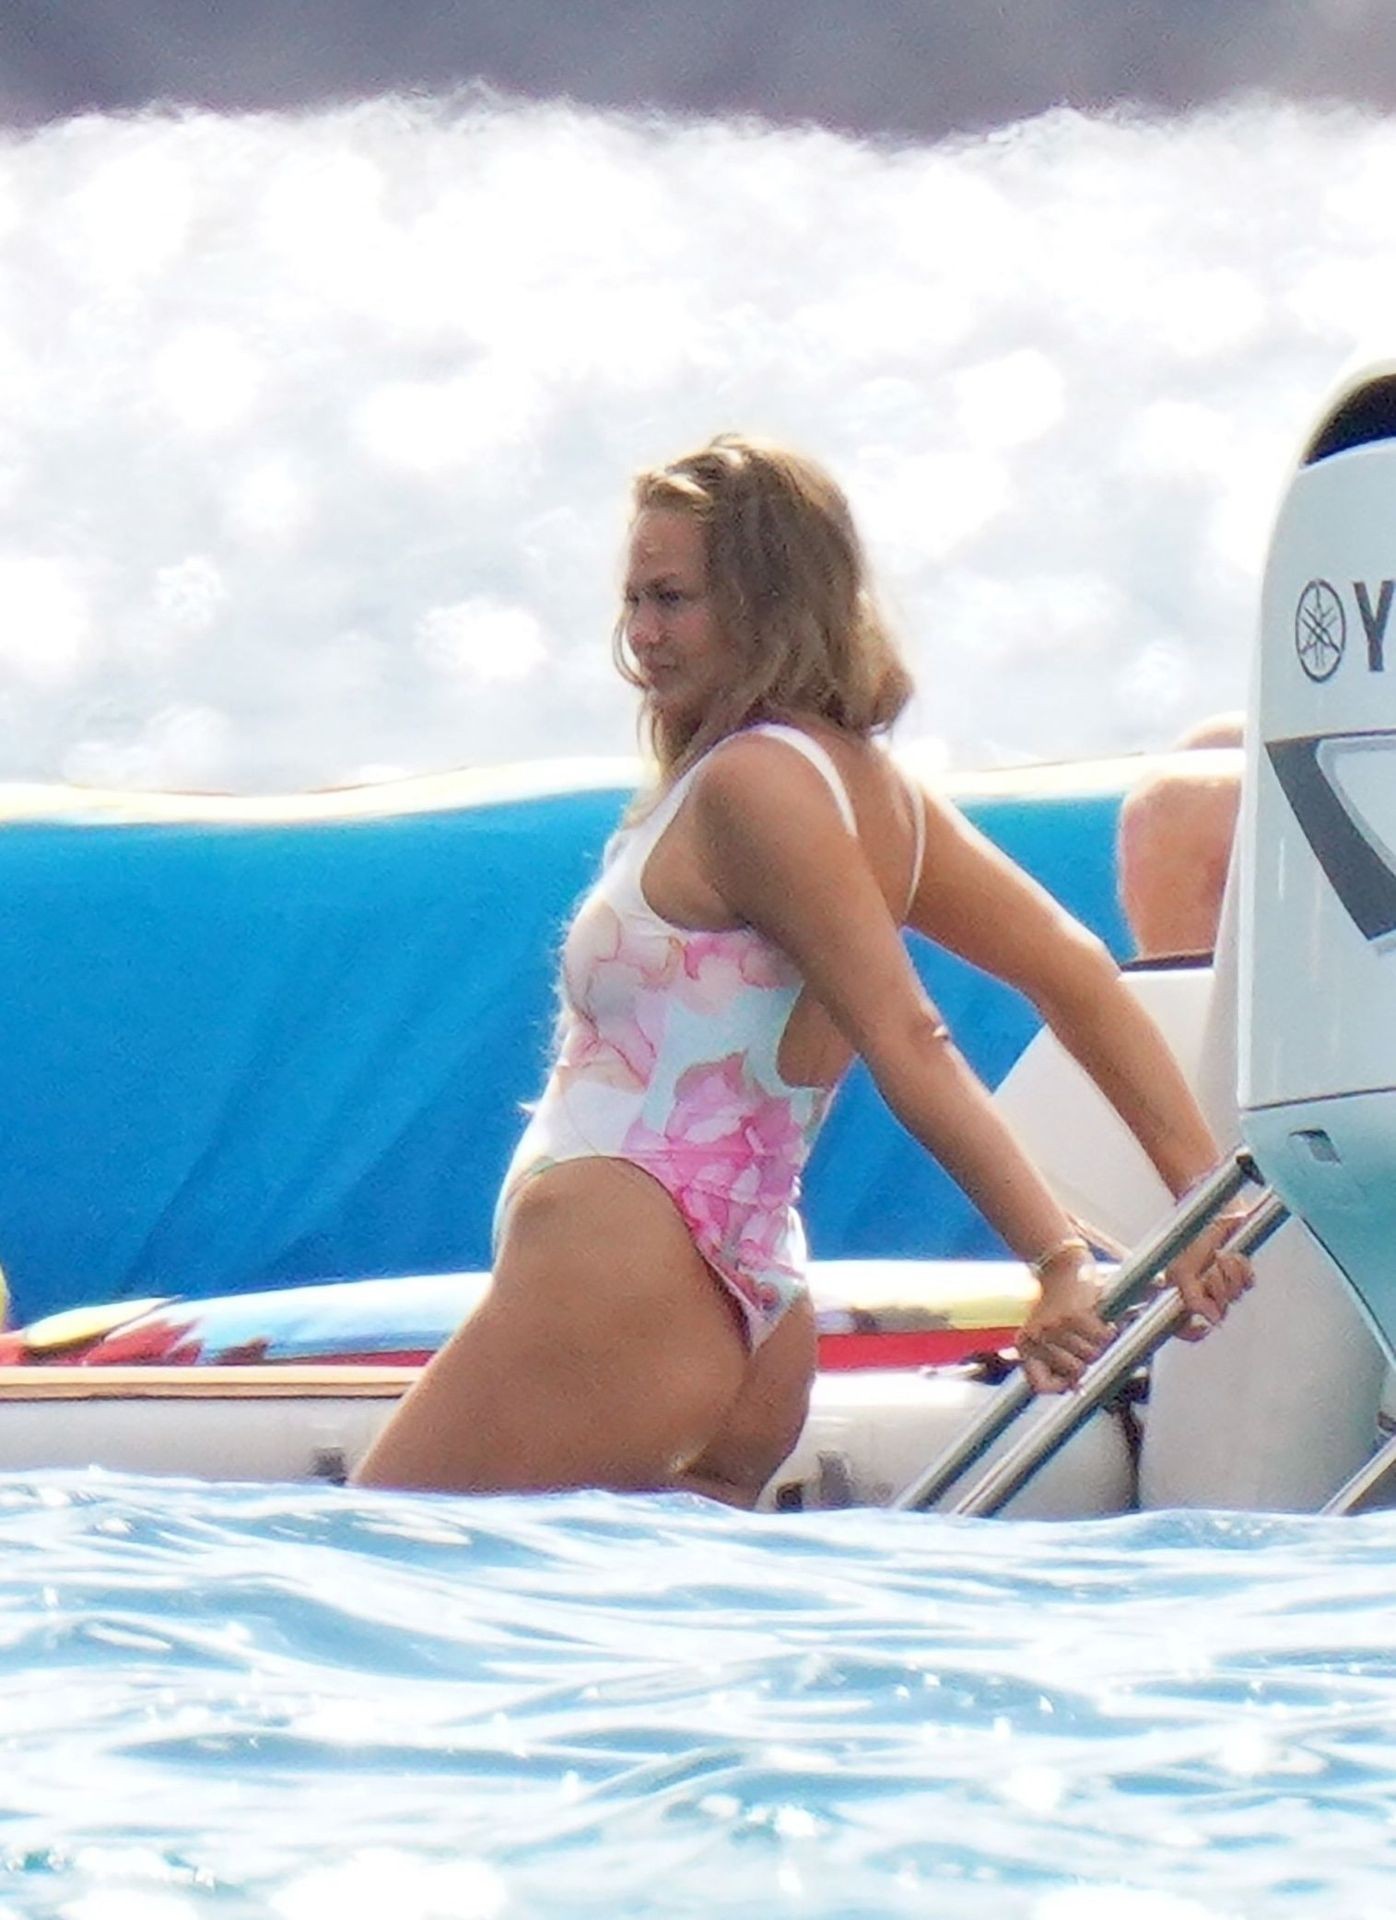 John Legend & Chrissy Teigen Have an Active Day Out on the Water in St Barts (16 Photos)